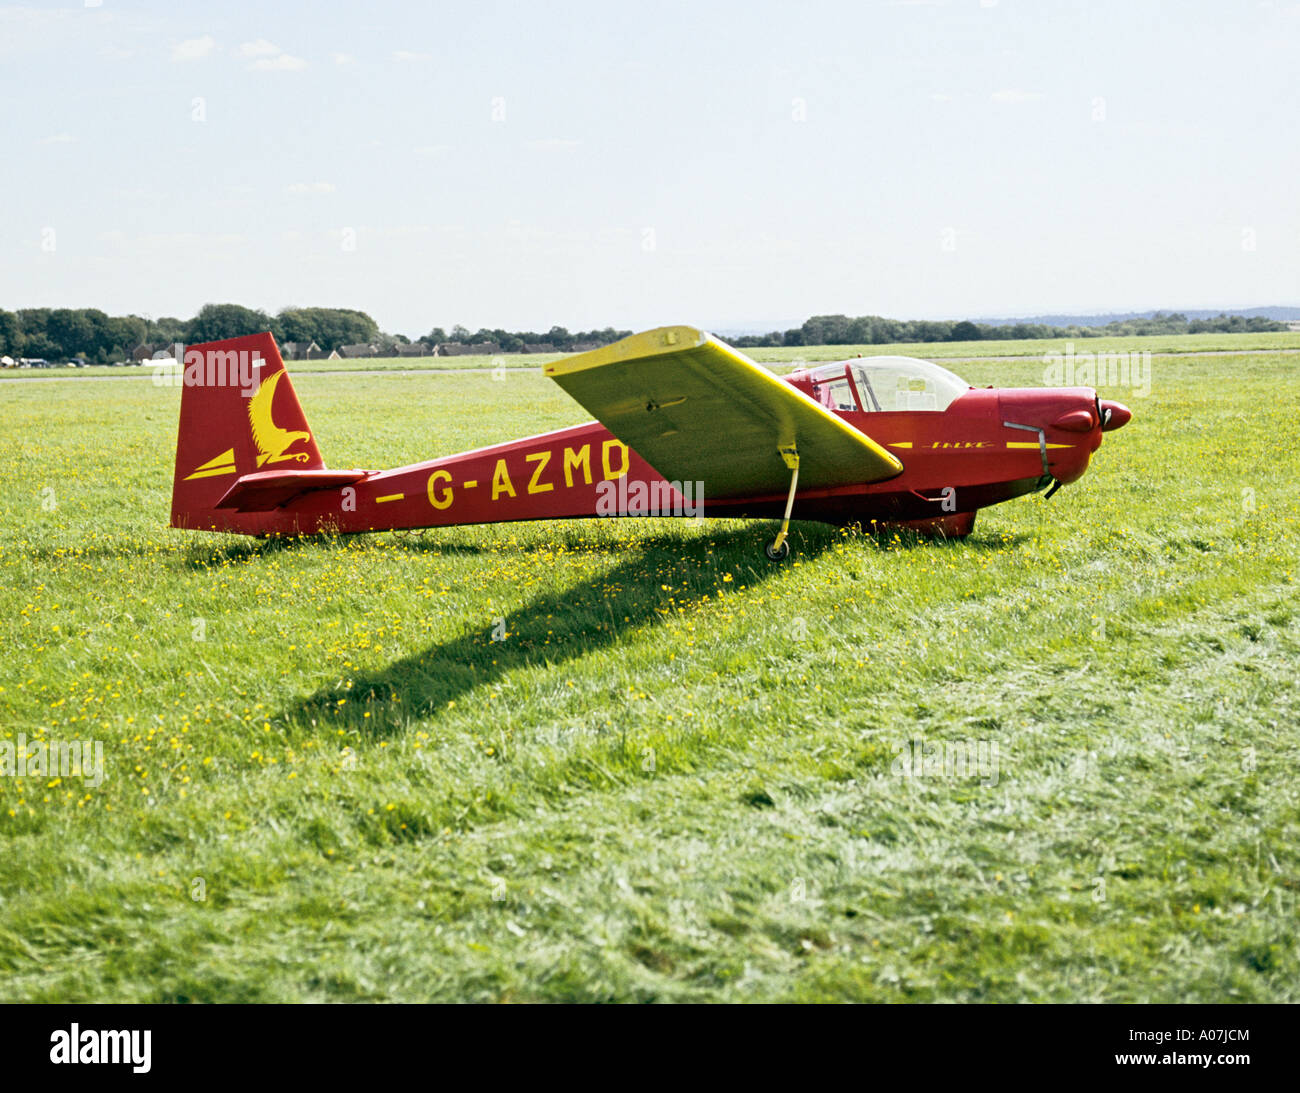 Military Glider Stock Photos & Military Glider Stock Images - Alamy1300 x 1093